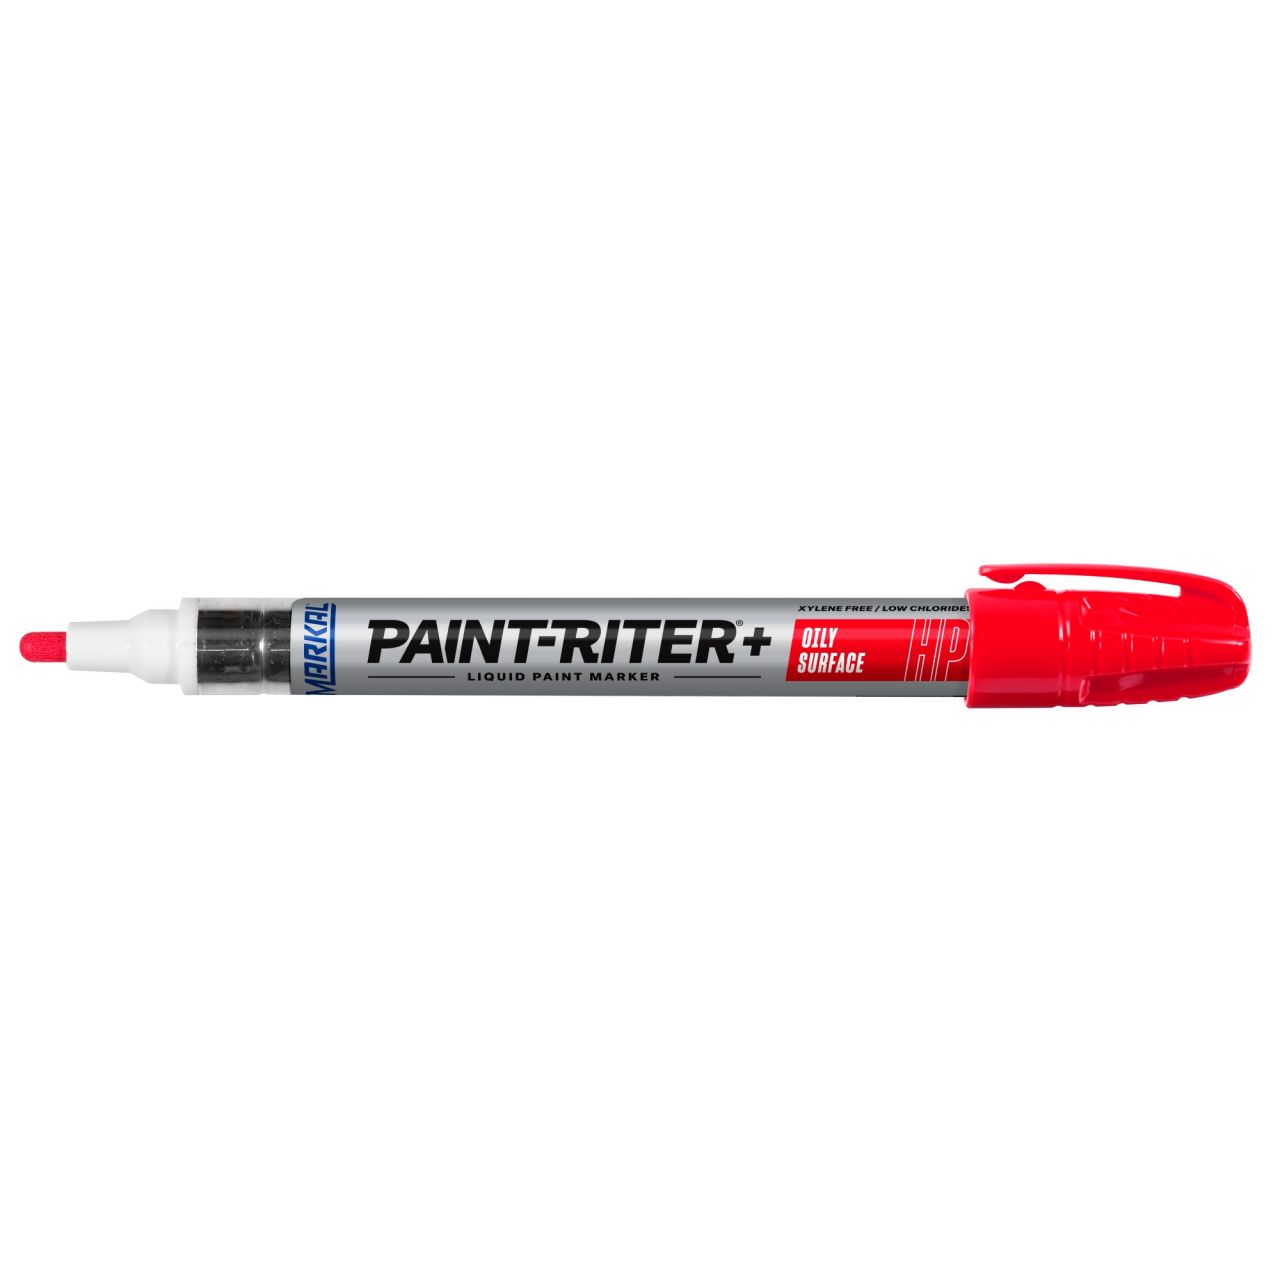 PAINT-RITER+ OILY SURFACE ROJO